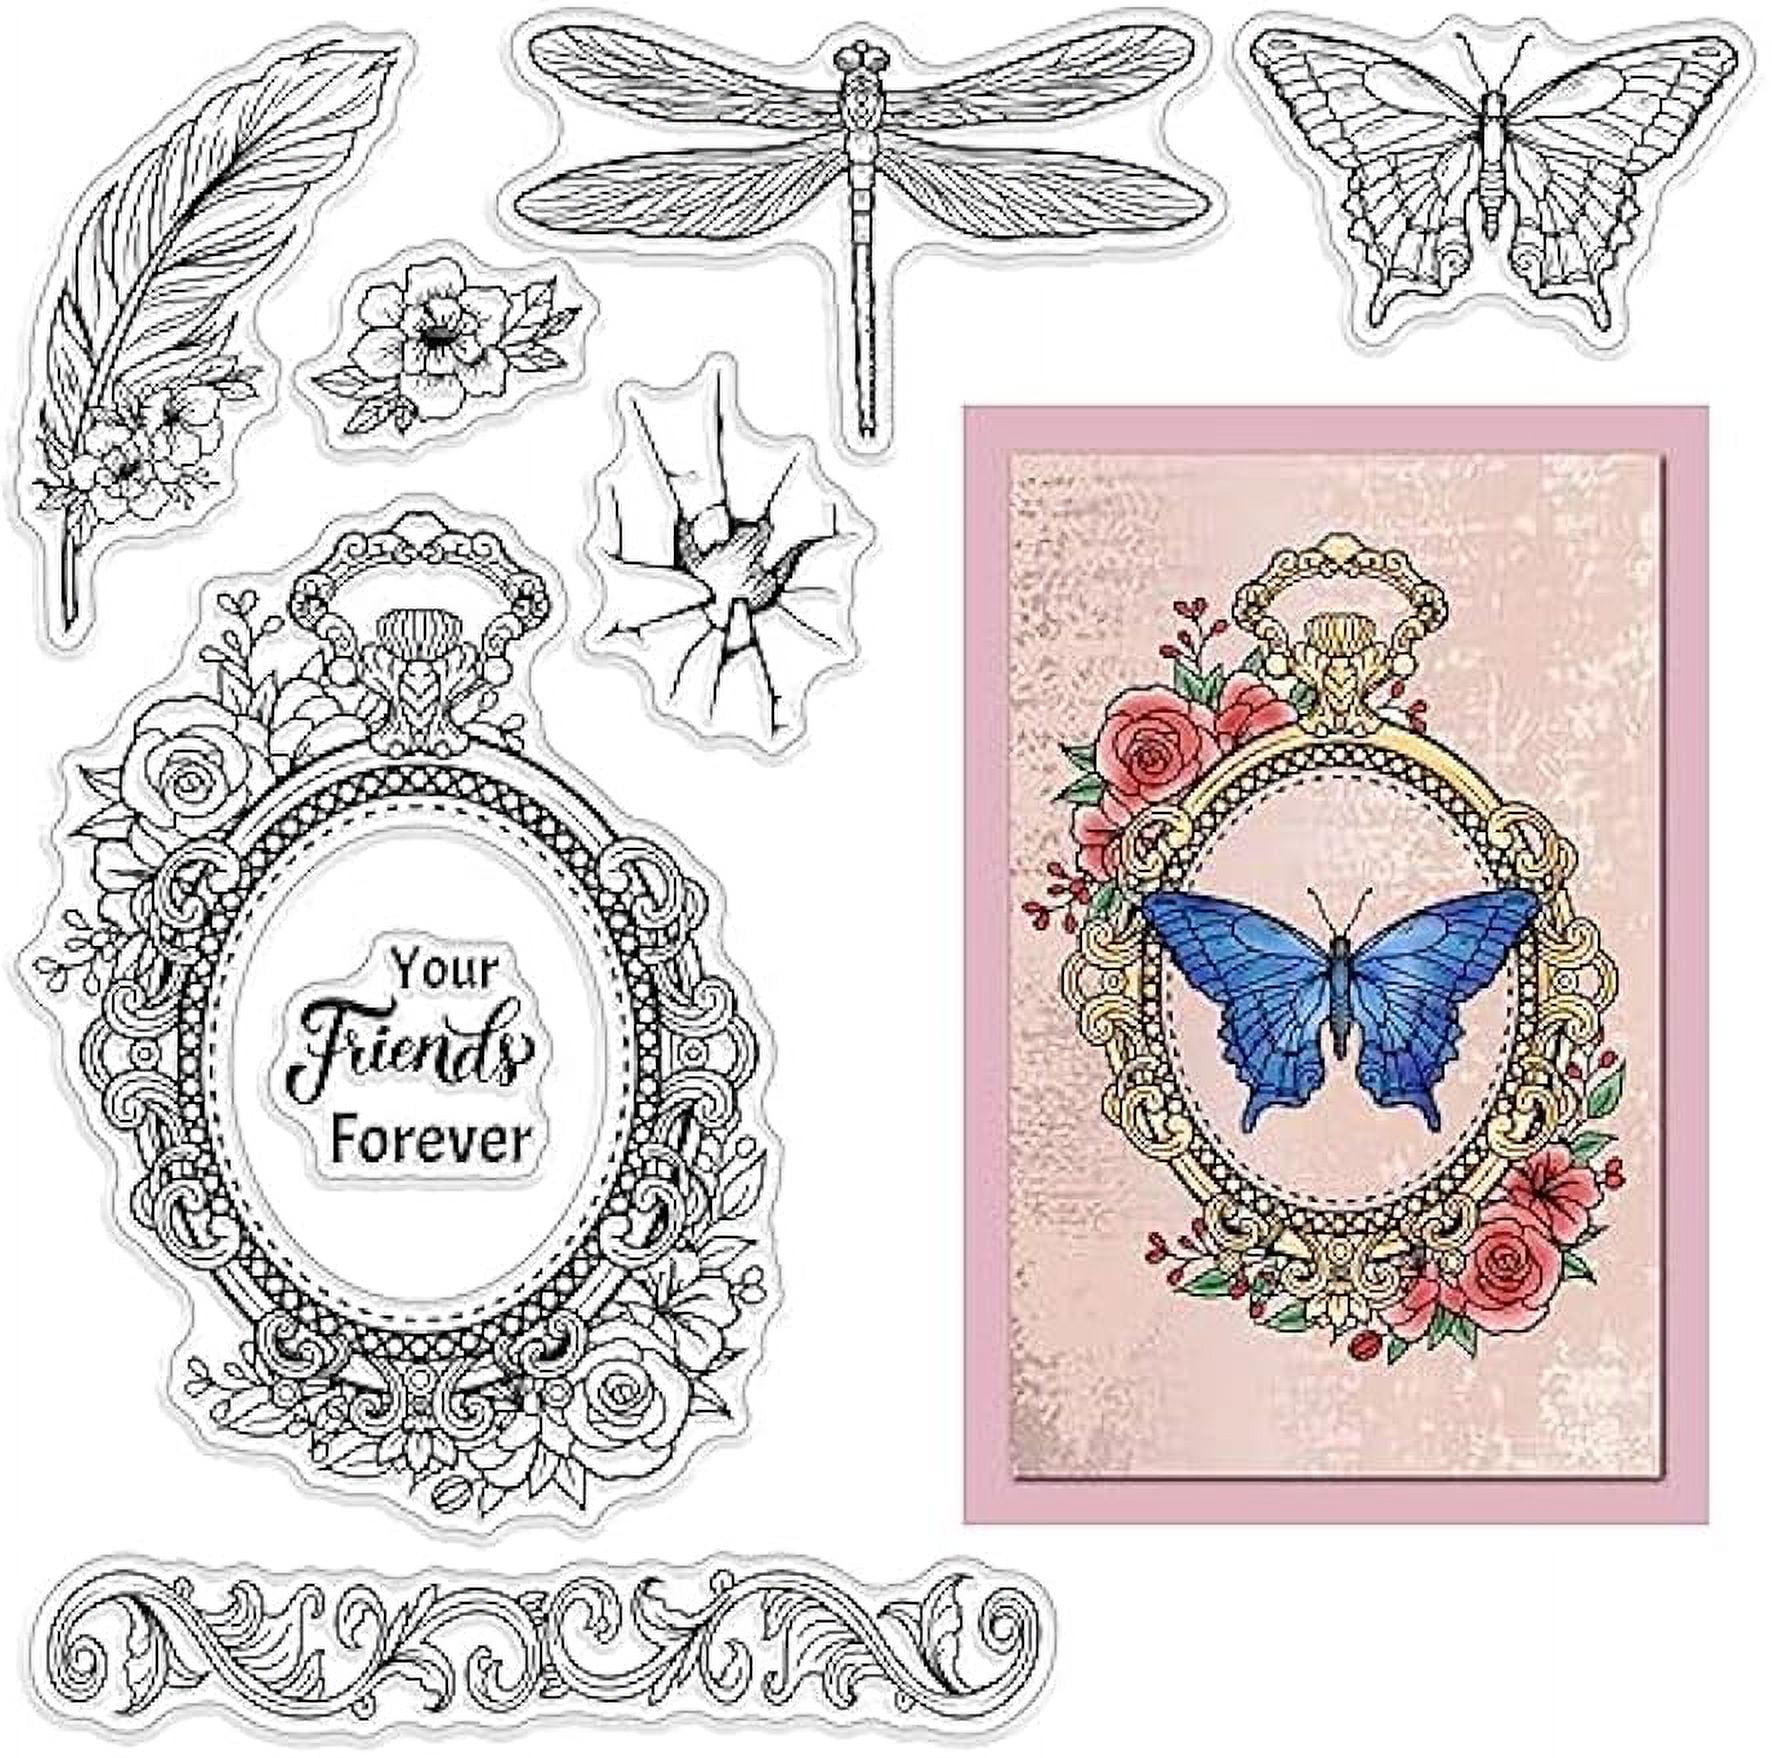 Estivaux Valentines Flowers Wreath Clear Stamps for Card Making and Journaling, Floral Birds Stamps Seal Sweet Words Rubber Stamps for Scrapbooking